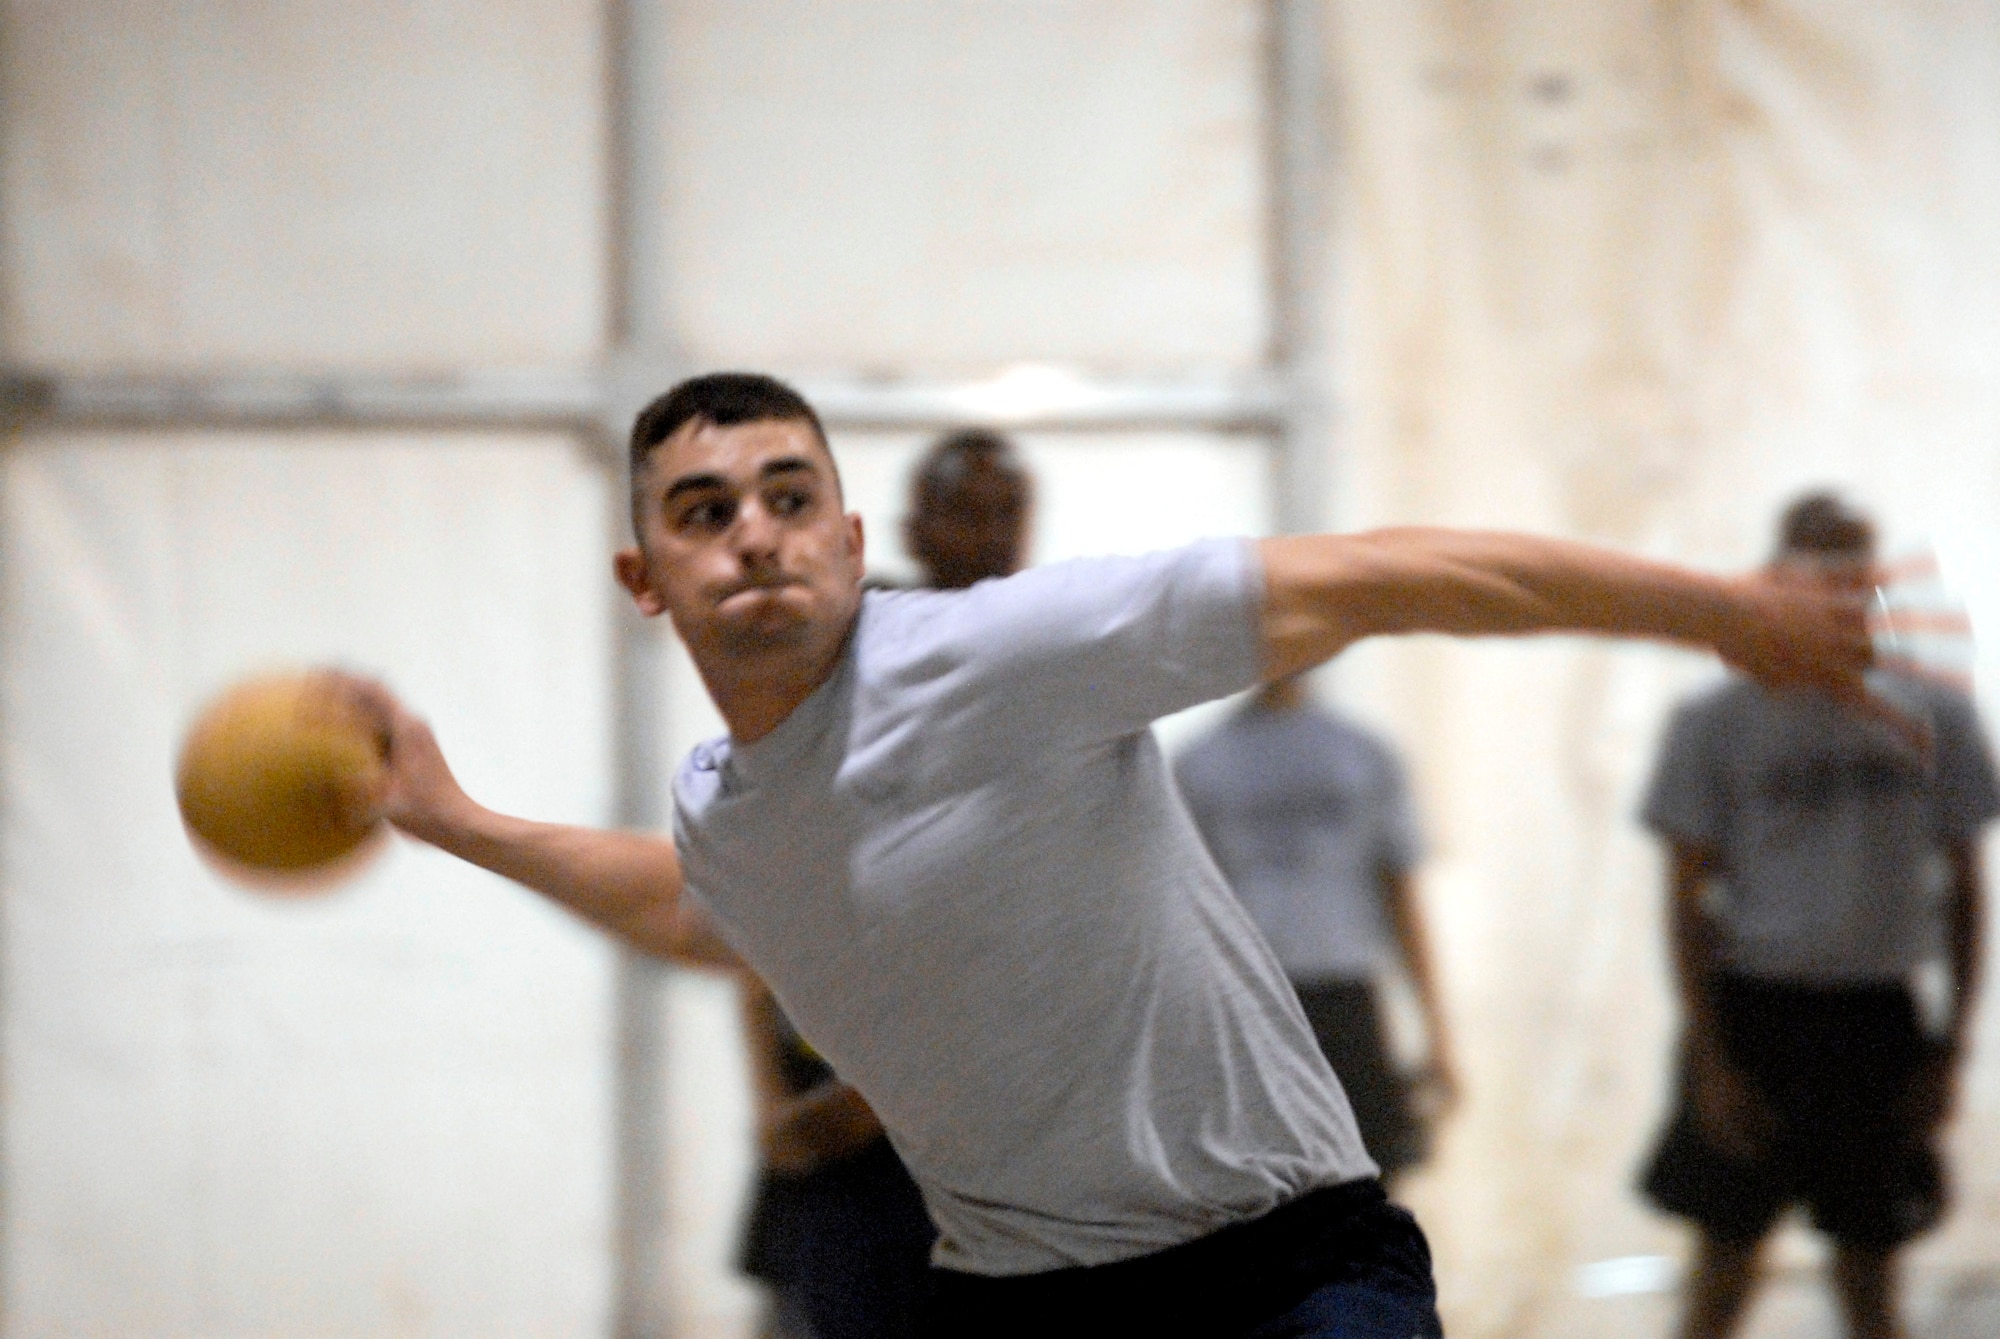 Senior Airman Lee Davis throws a dodge ball during the first ever coalition games held Aug. 25 at Camp Adder and Ali Base, Iraq. The Air Force team took first place in the event. The coalition games brought together teams from the U.S. Air Force, Army and Navy, along with Australians and Romanian teams to compete for barging rights as the best on base. The U.S. Air Force came out on top, taking first place in five events. Airman Davis is a member of the 407th Expeditionary Communications Squadron at Ali Base. (U.S. Air Force Photo/Master Sgt. Robert Valenca)  
     

